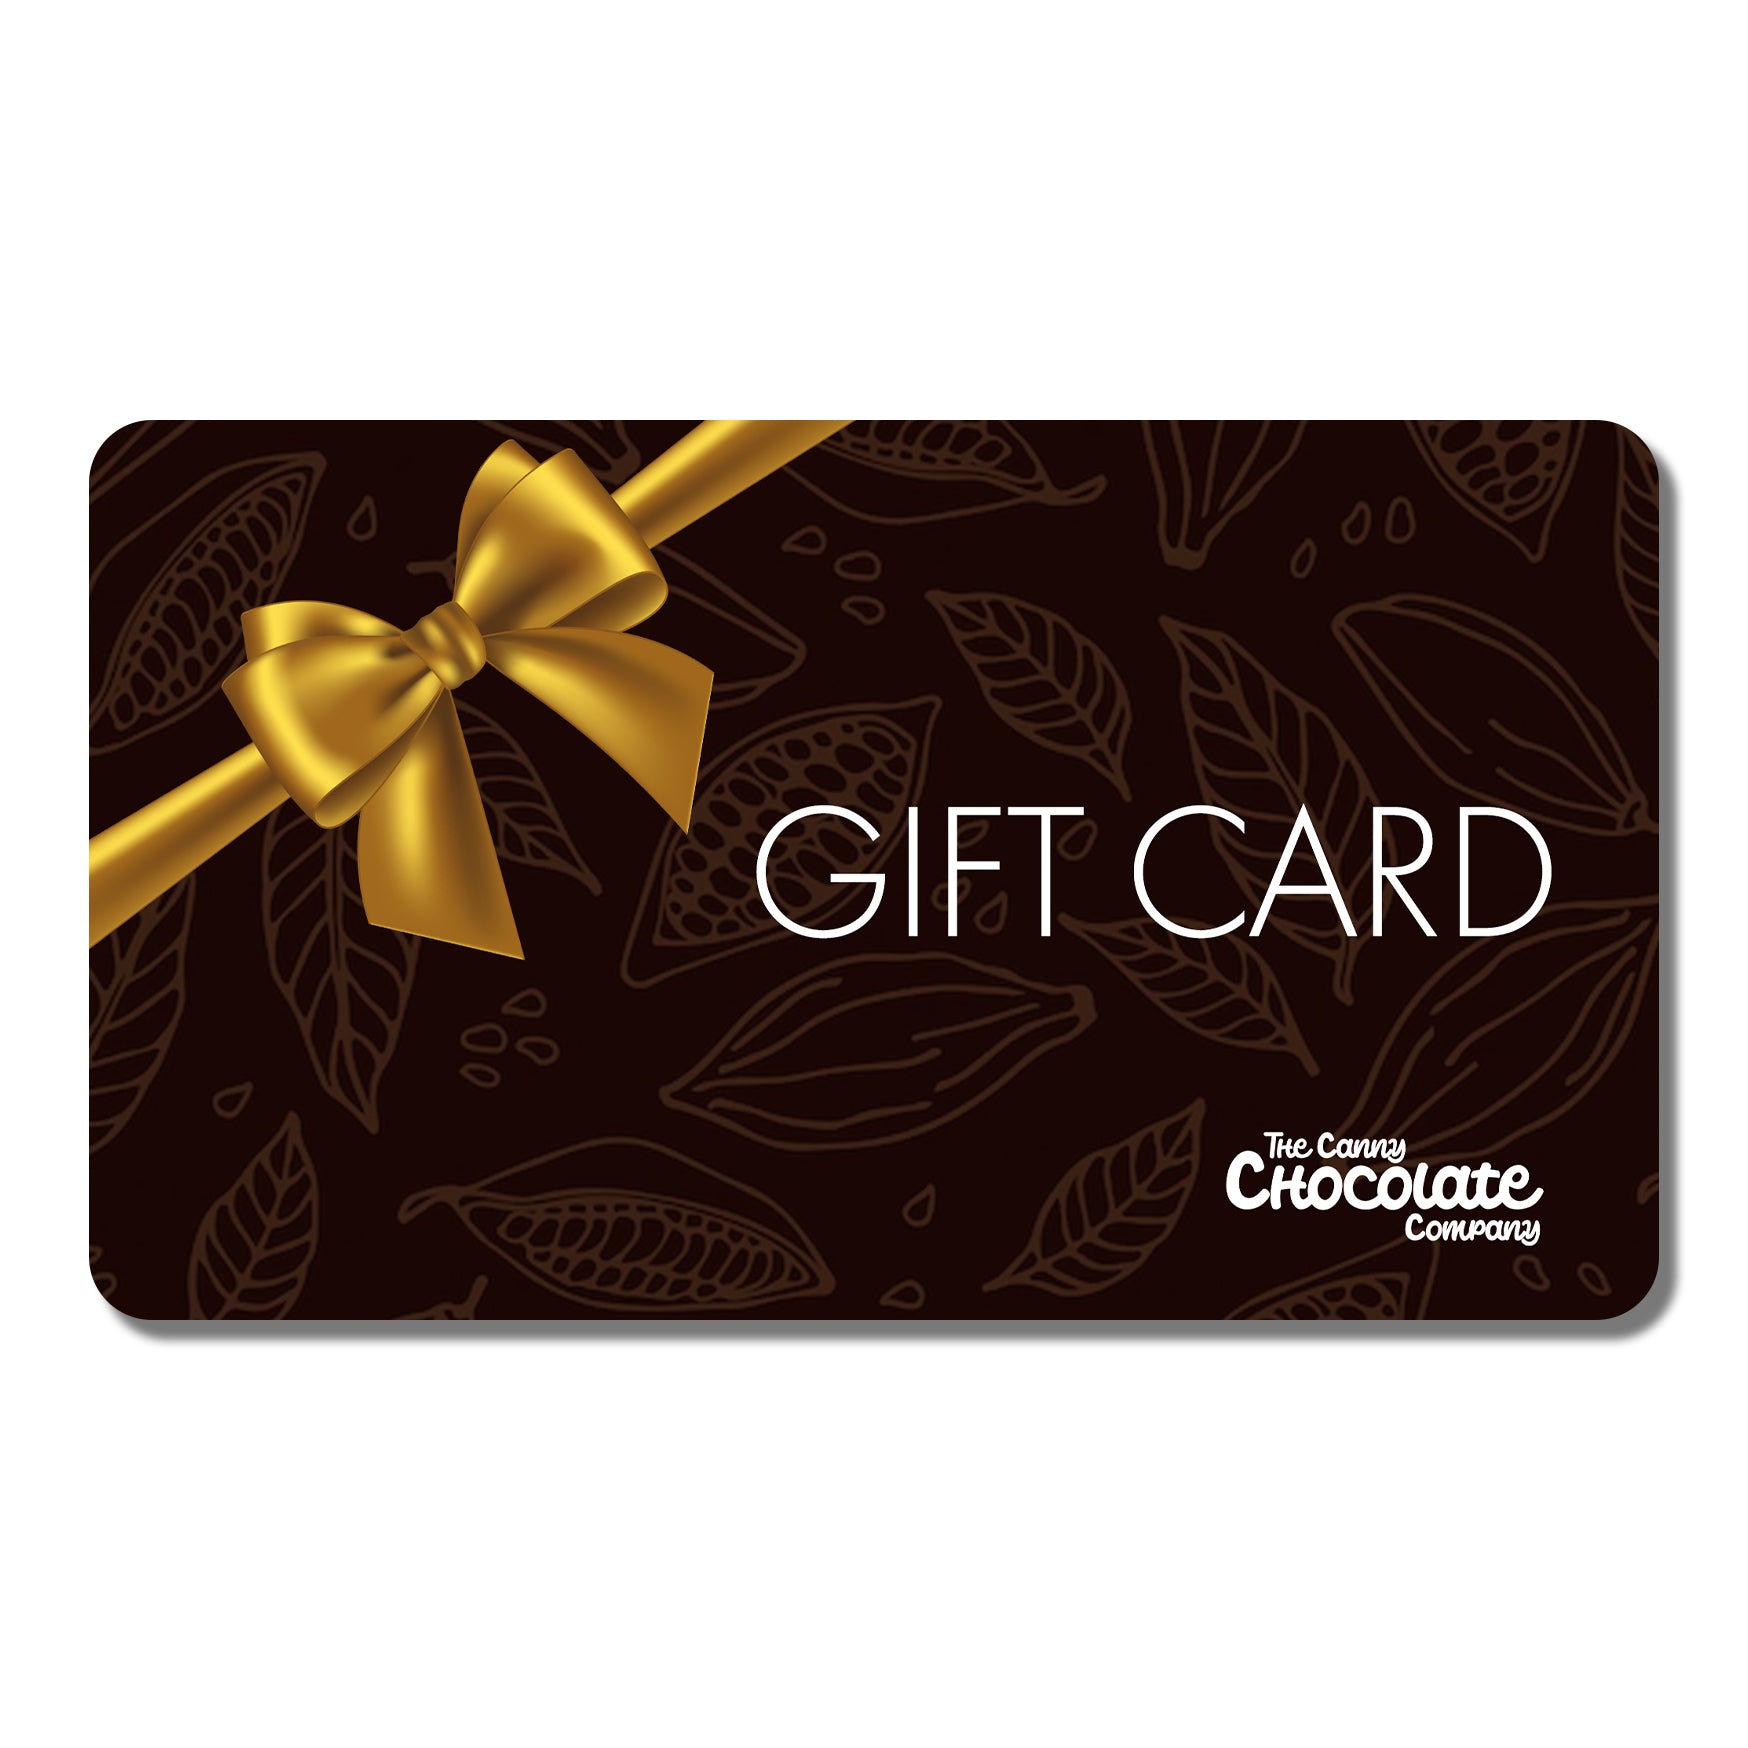 The Canny Chocolate Company Gift Card